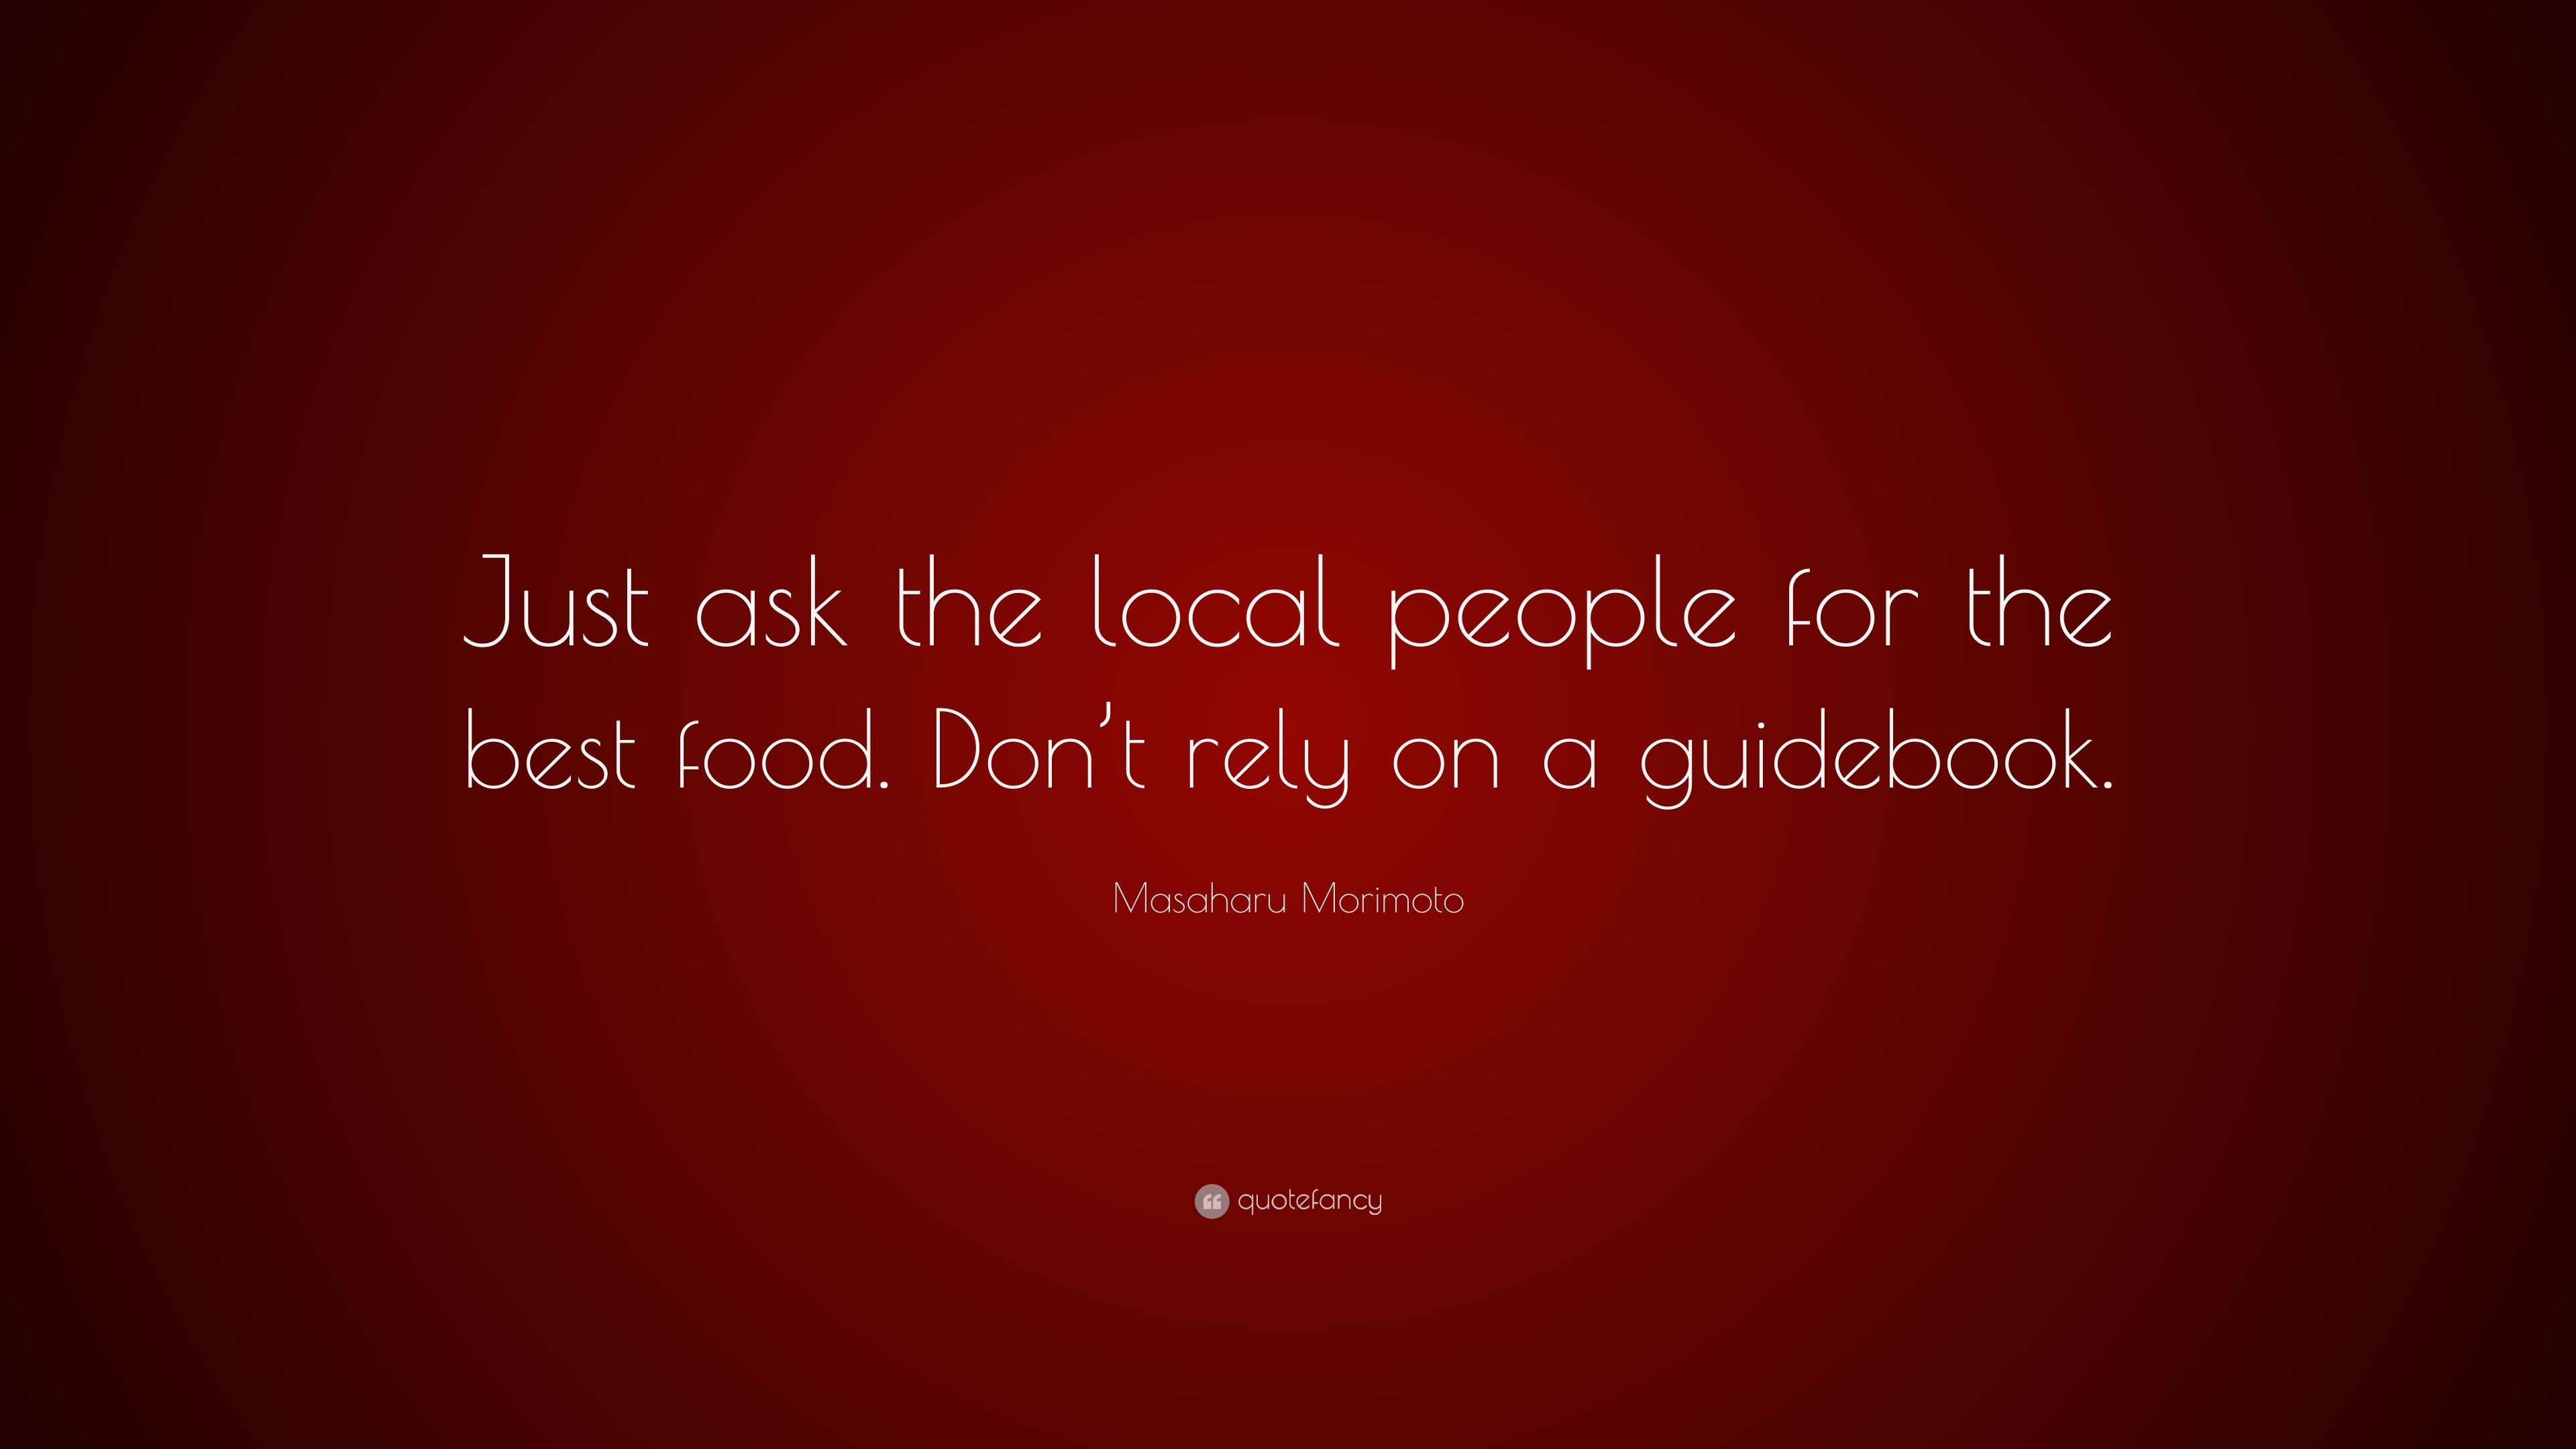 Masaharu Morimoto Quote Just Ask The Local People For The Best Food Don T Rely On A Guidebook 7 Wallpapers Quotefancy